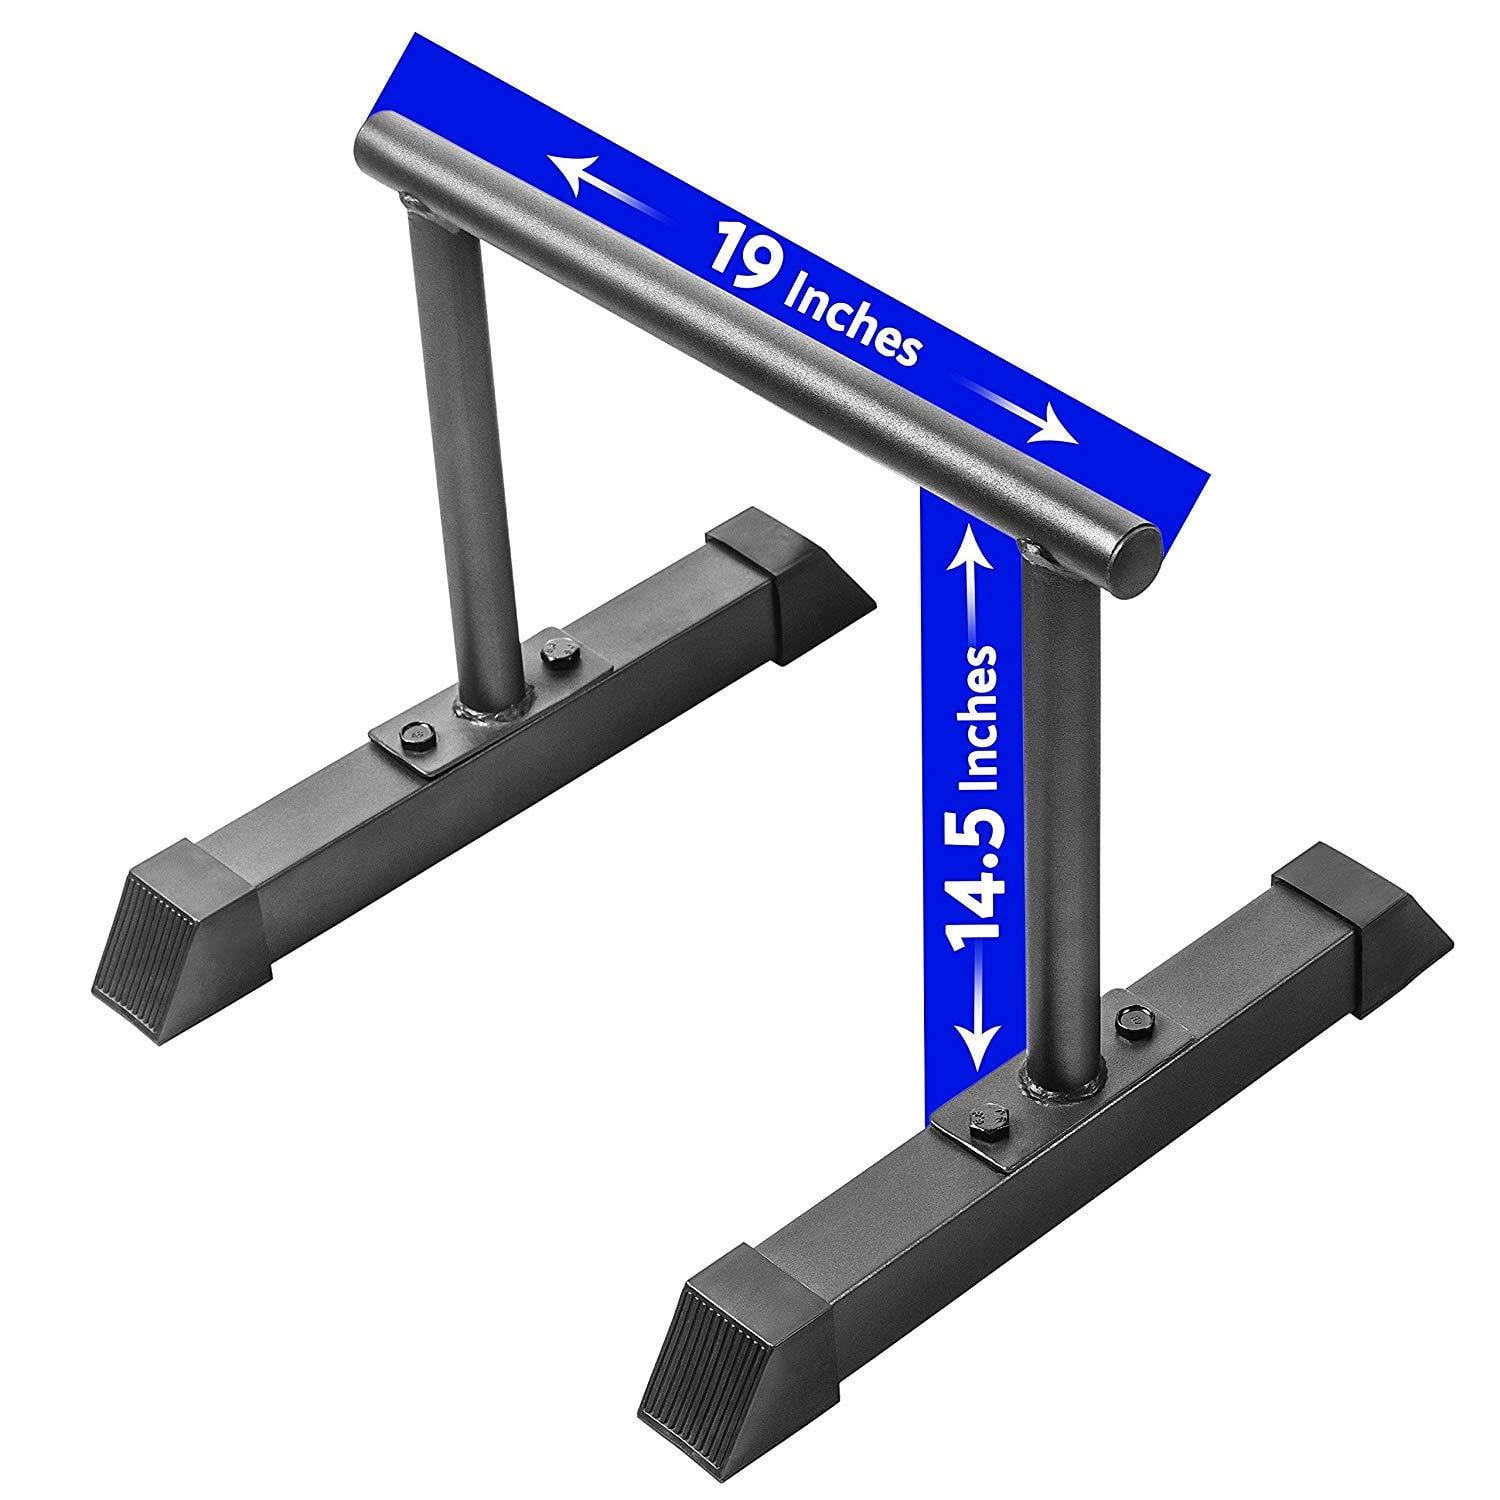 XL Parallette Bars Versatile Push Up & Dip Bars for Strength Workouts 